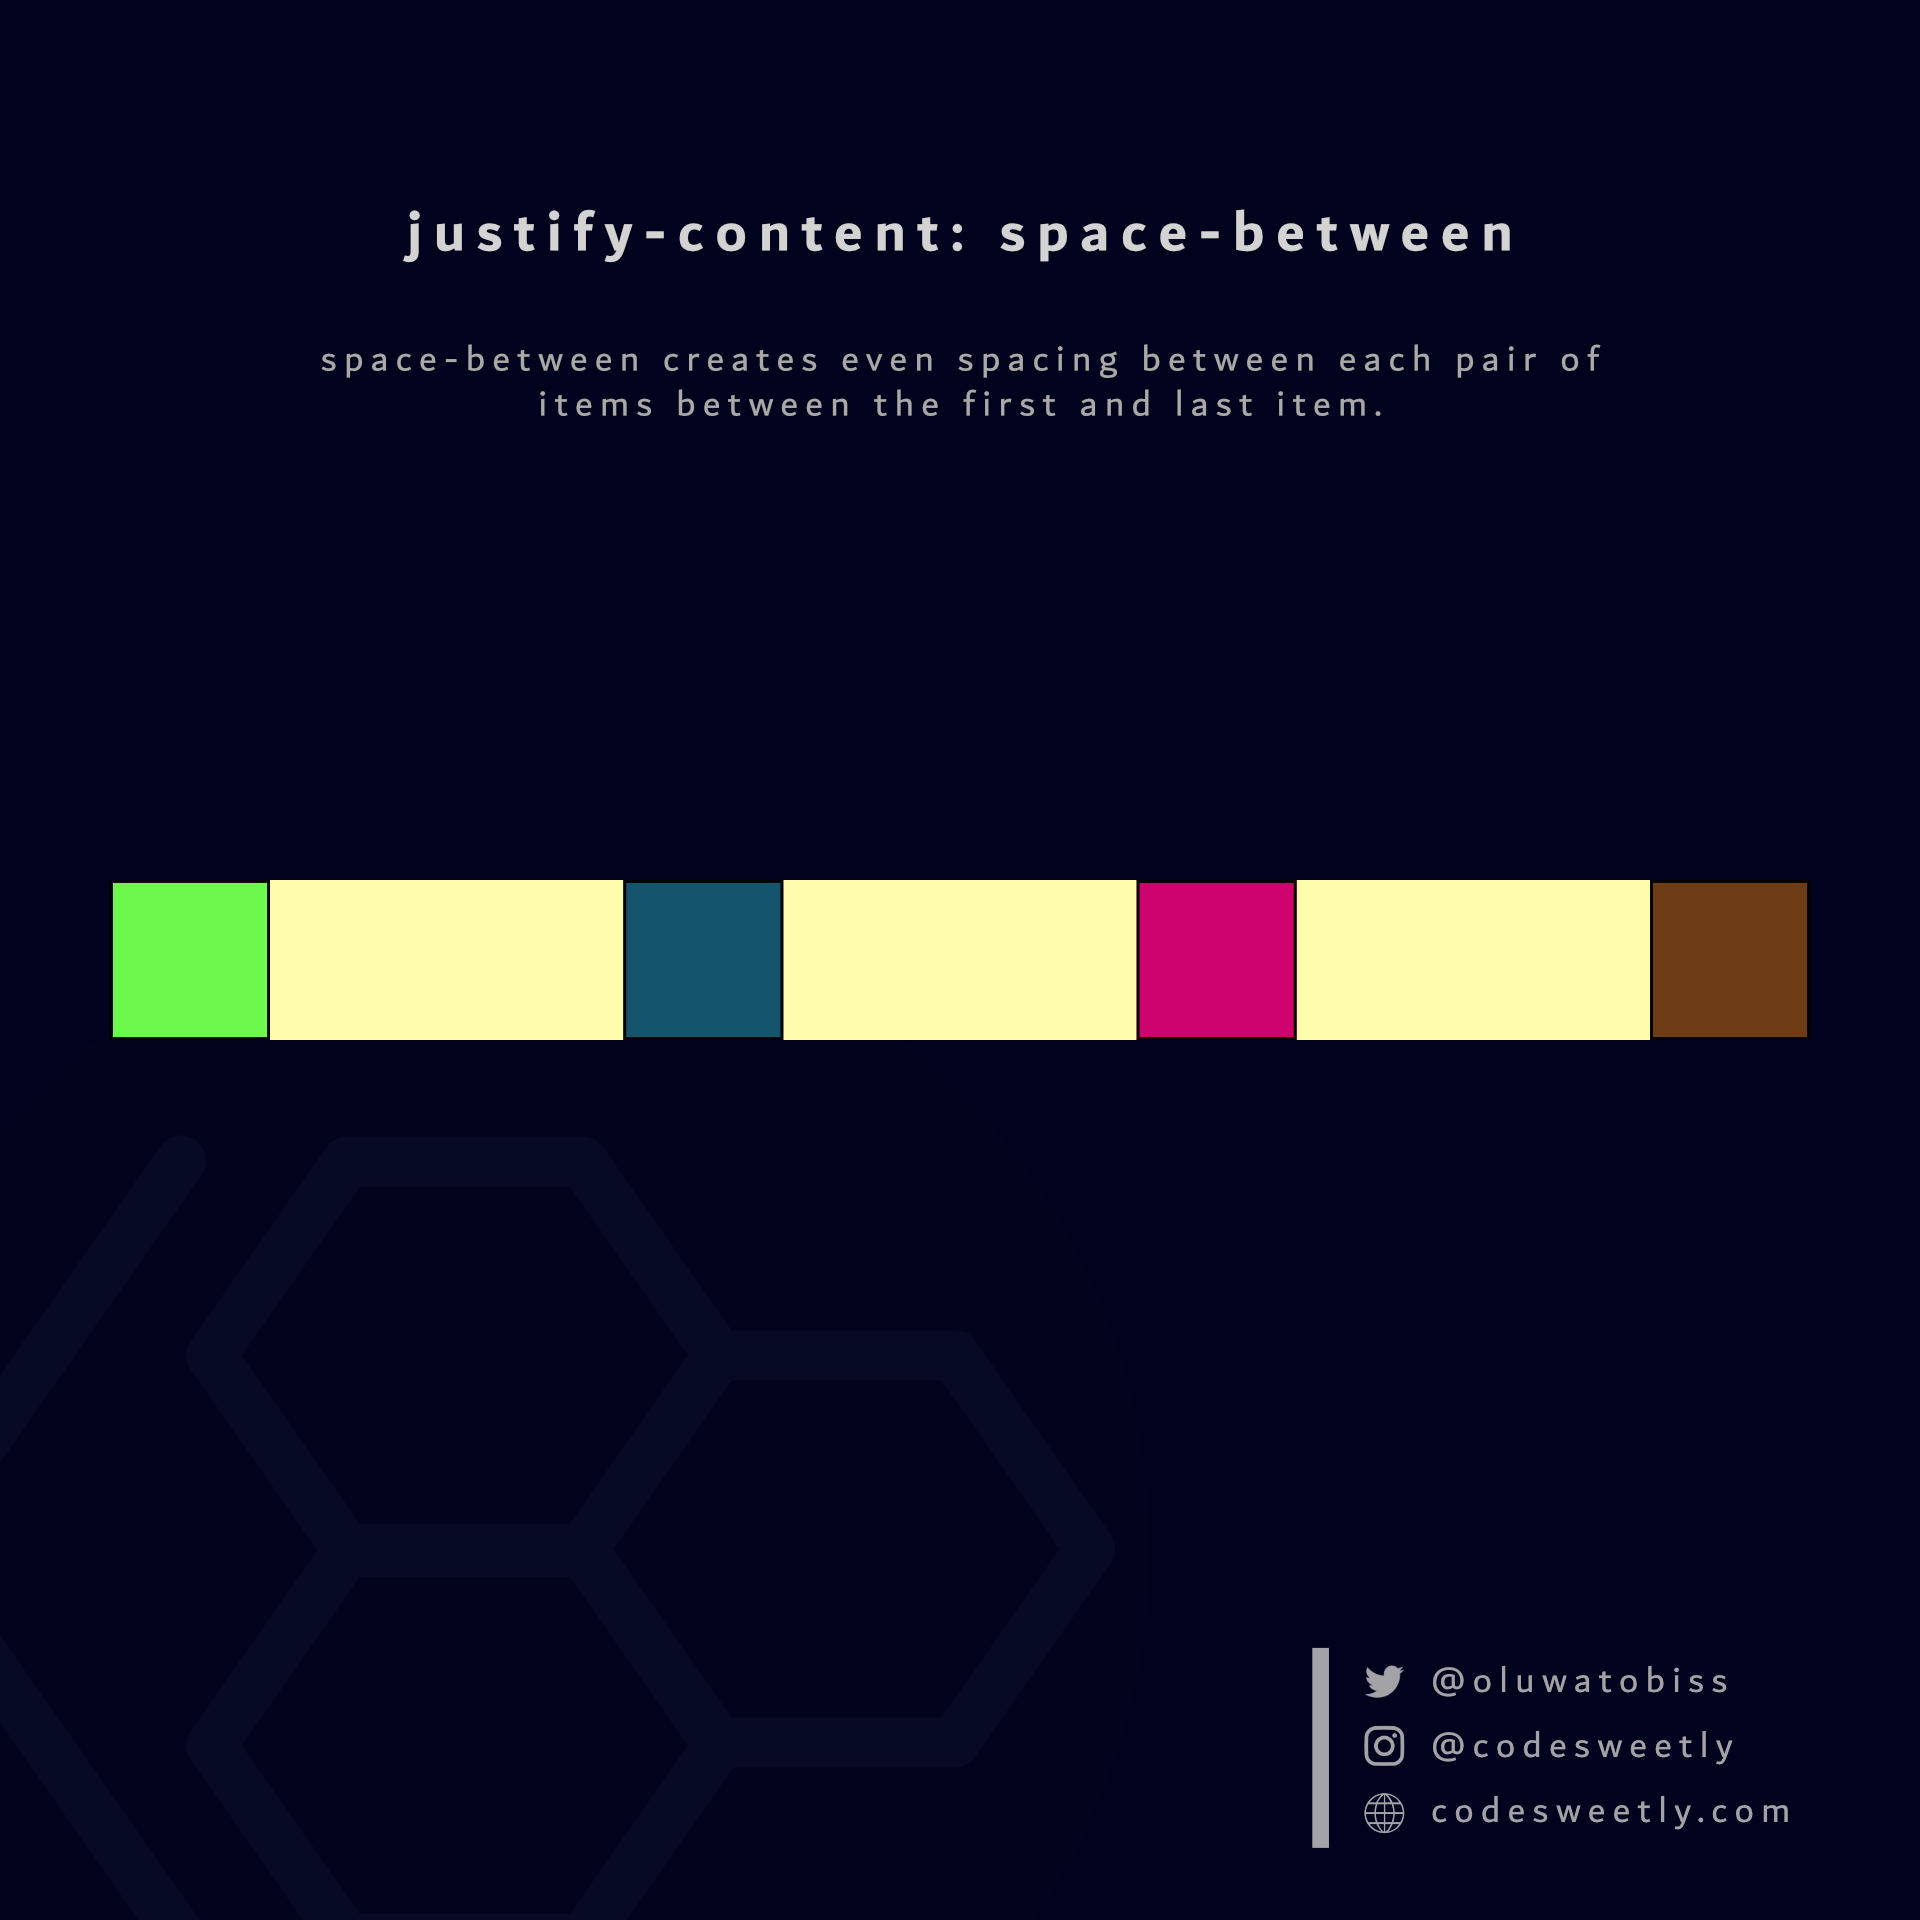 Illustration of justify-content&#39;s space-between value